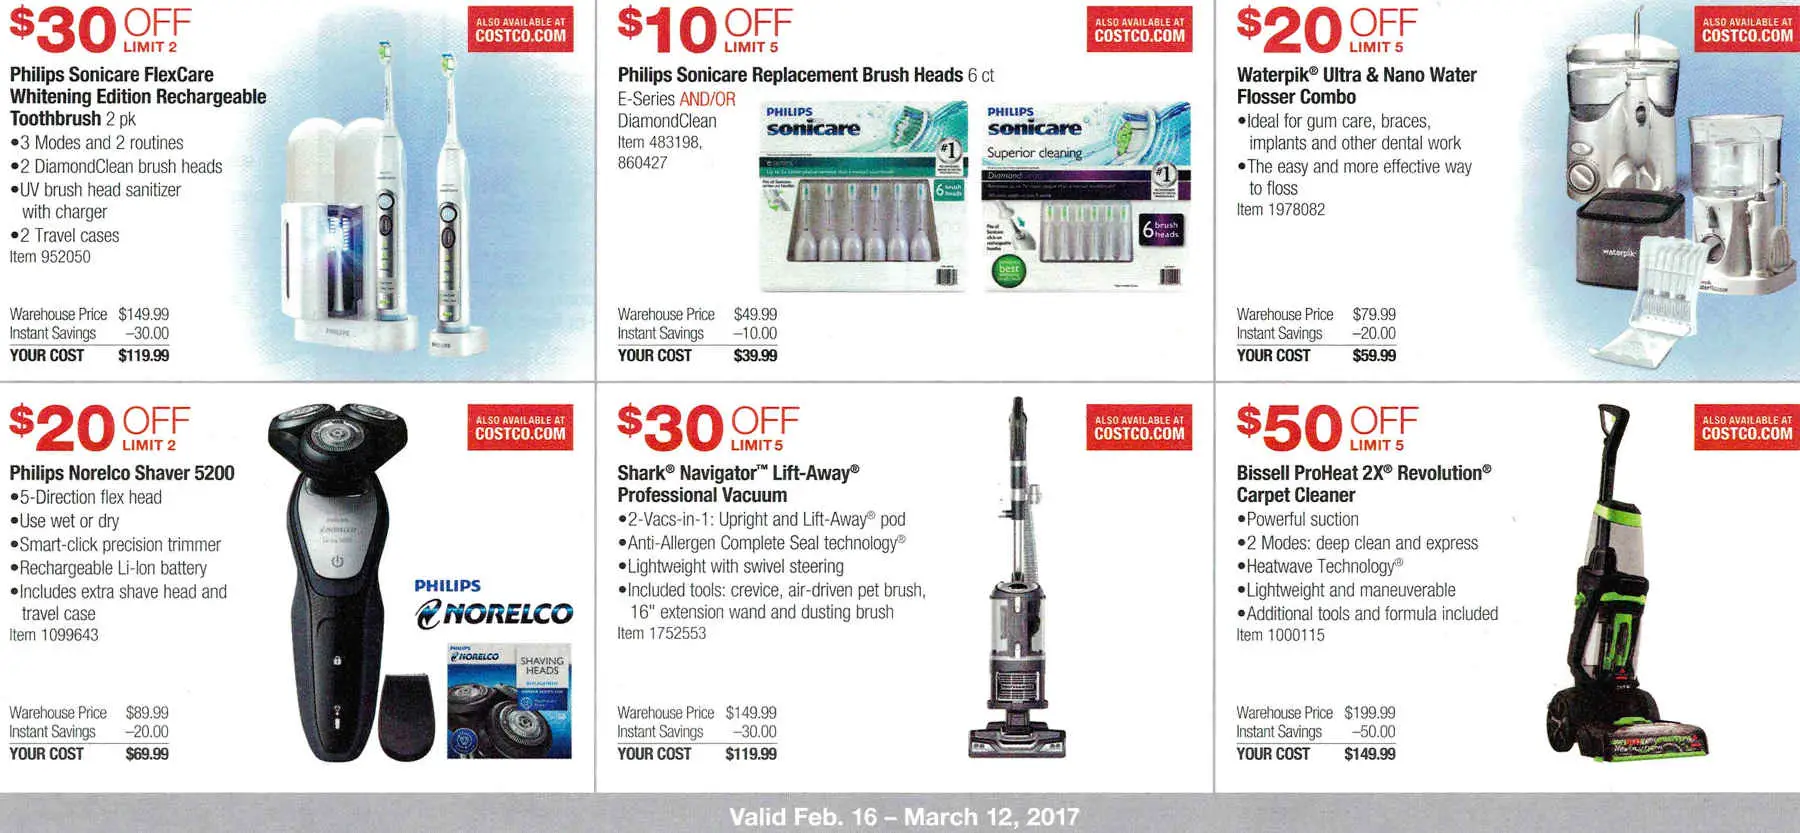 February 2017 Costco Coupon Book Page 1